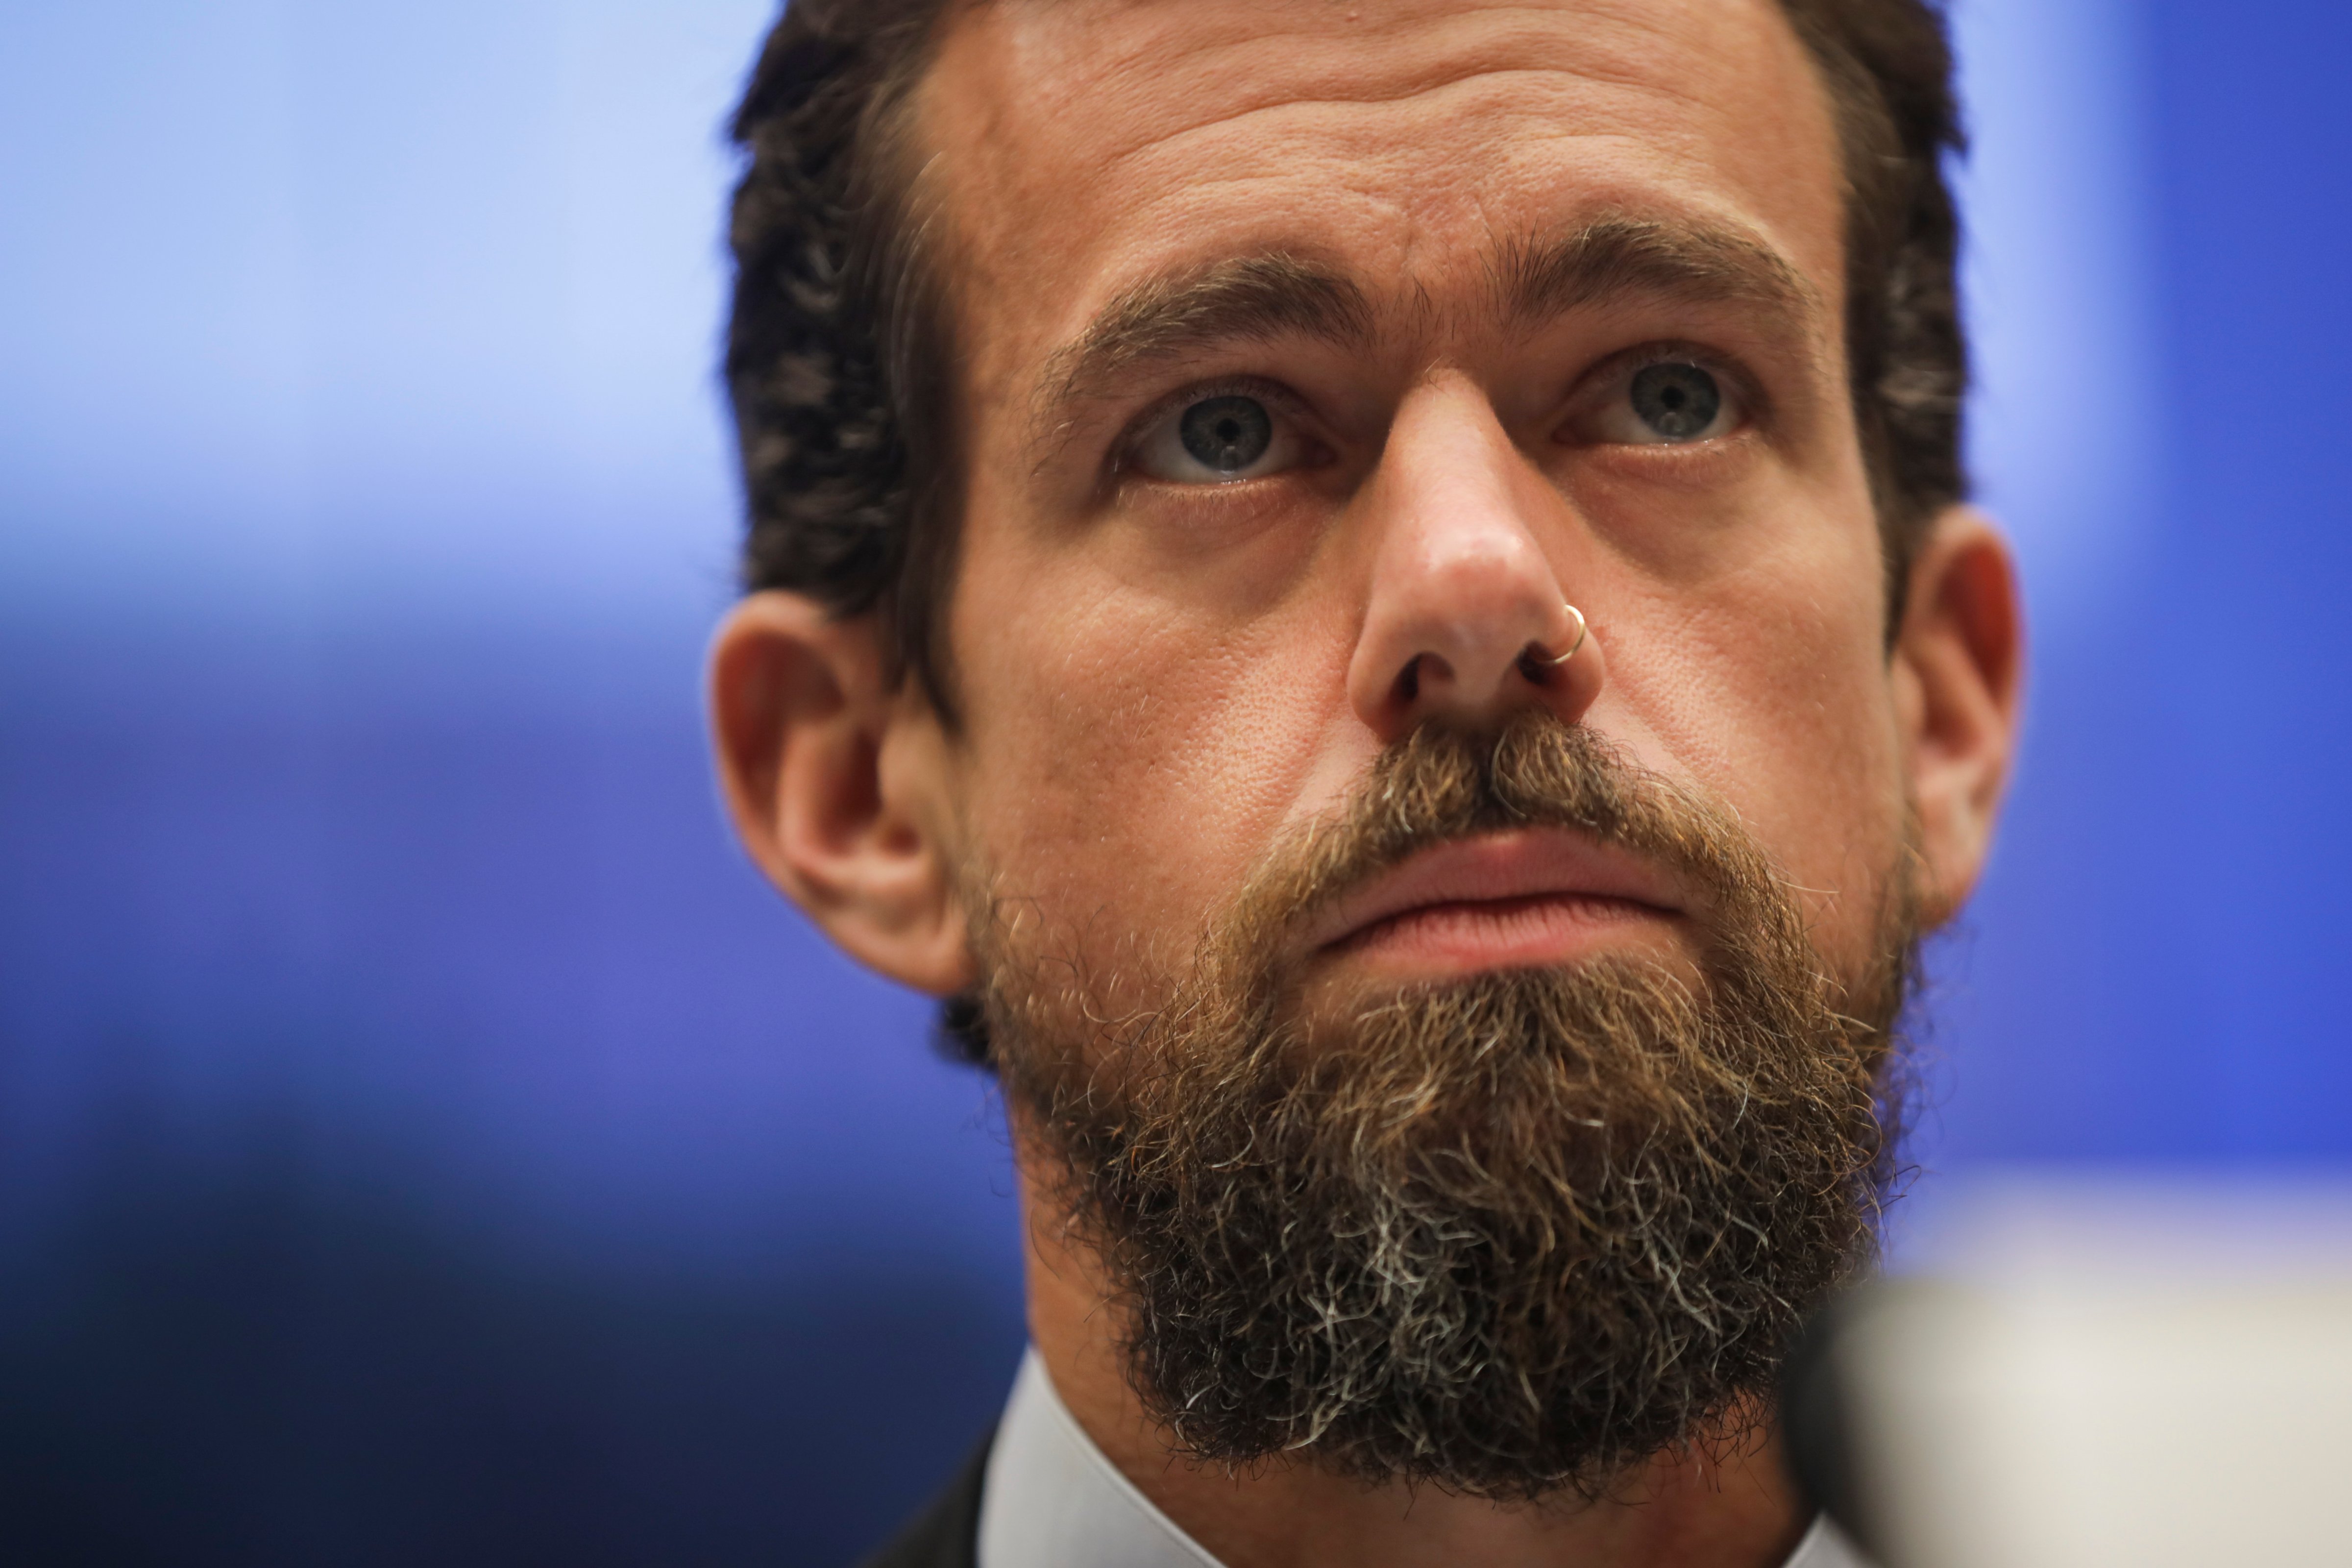 Twitter chief executive officer Jack Dorsey testifies during a House Committee on Energy and Commerce hearing about Twitter's transparency and accountability, on Capitol Hill, September 5, 2018 in Washington, D.C. (Drew Angerer&mdash;Getty Images)